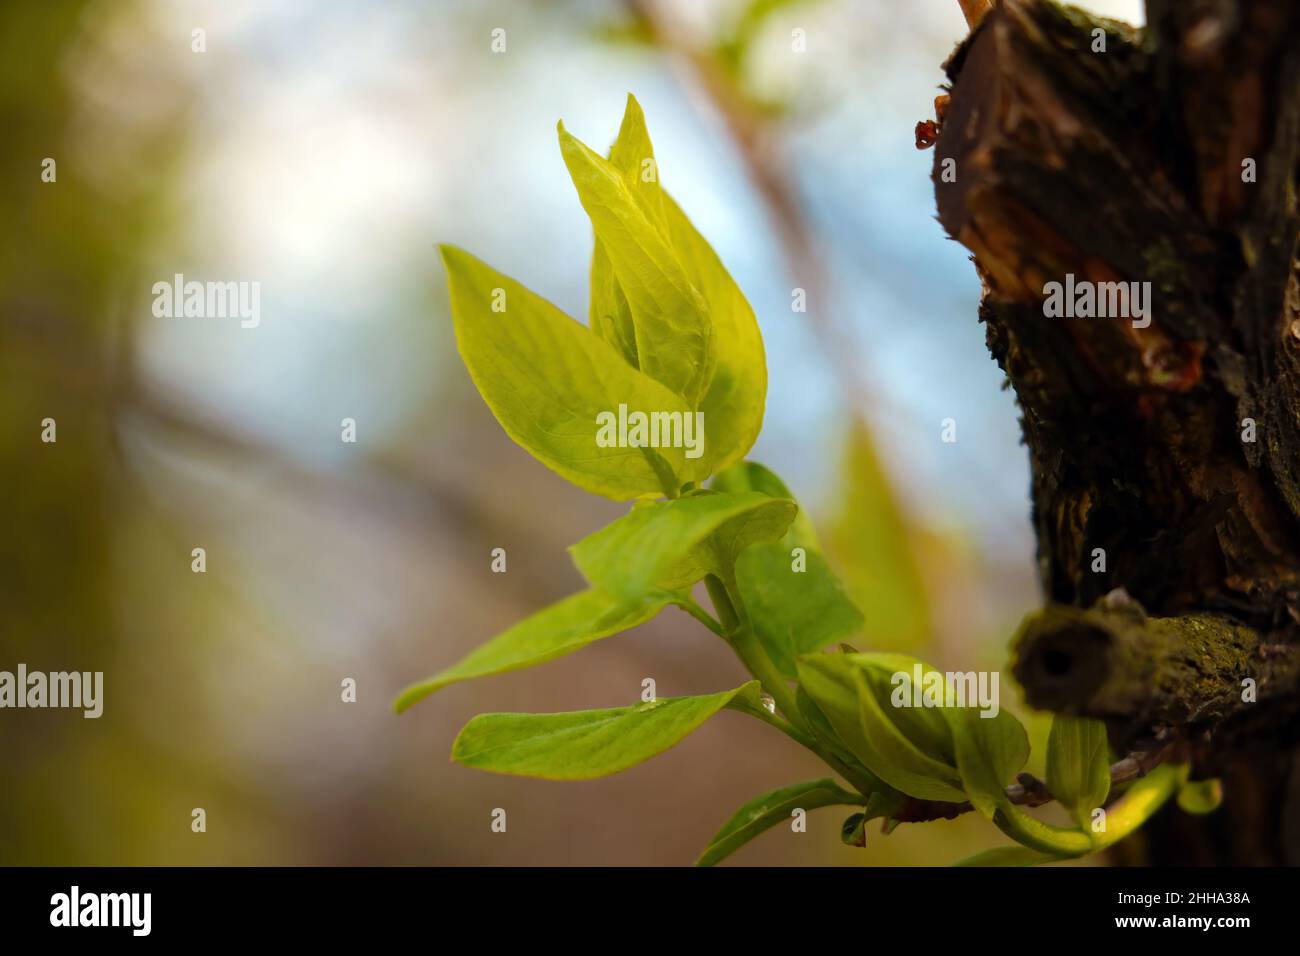 A young green branch grows from a tree trunk in spring Stock Photo